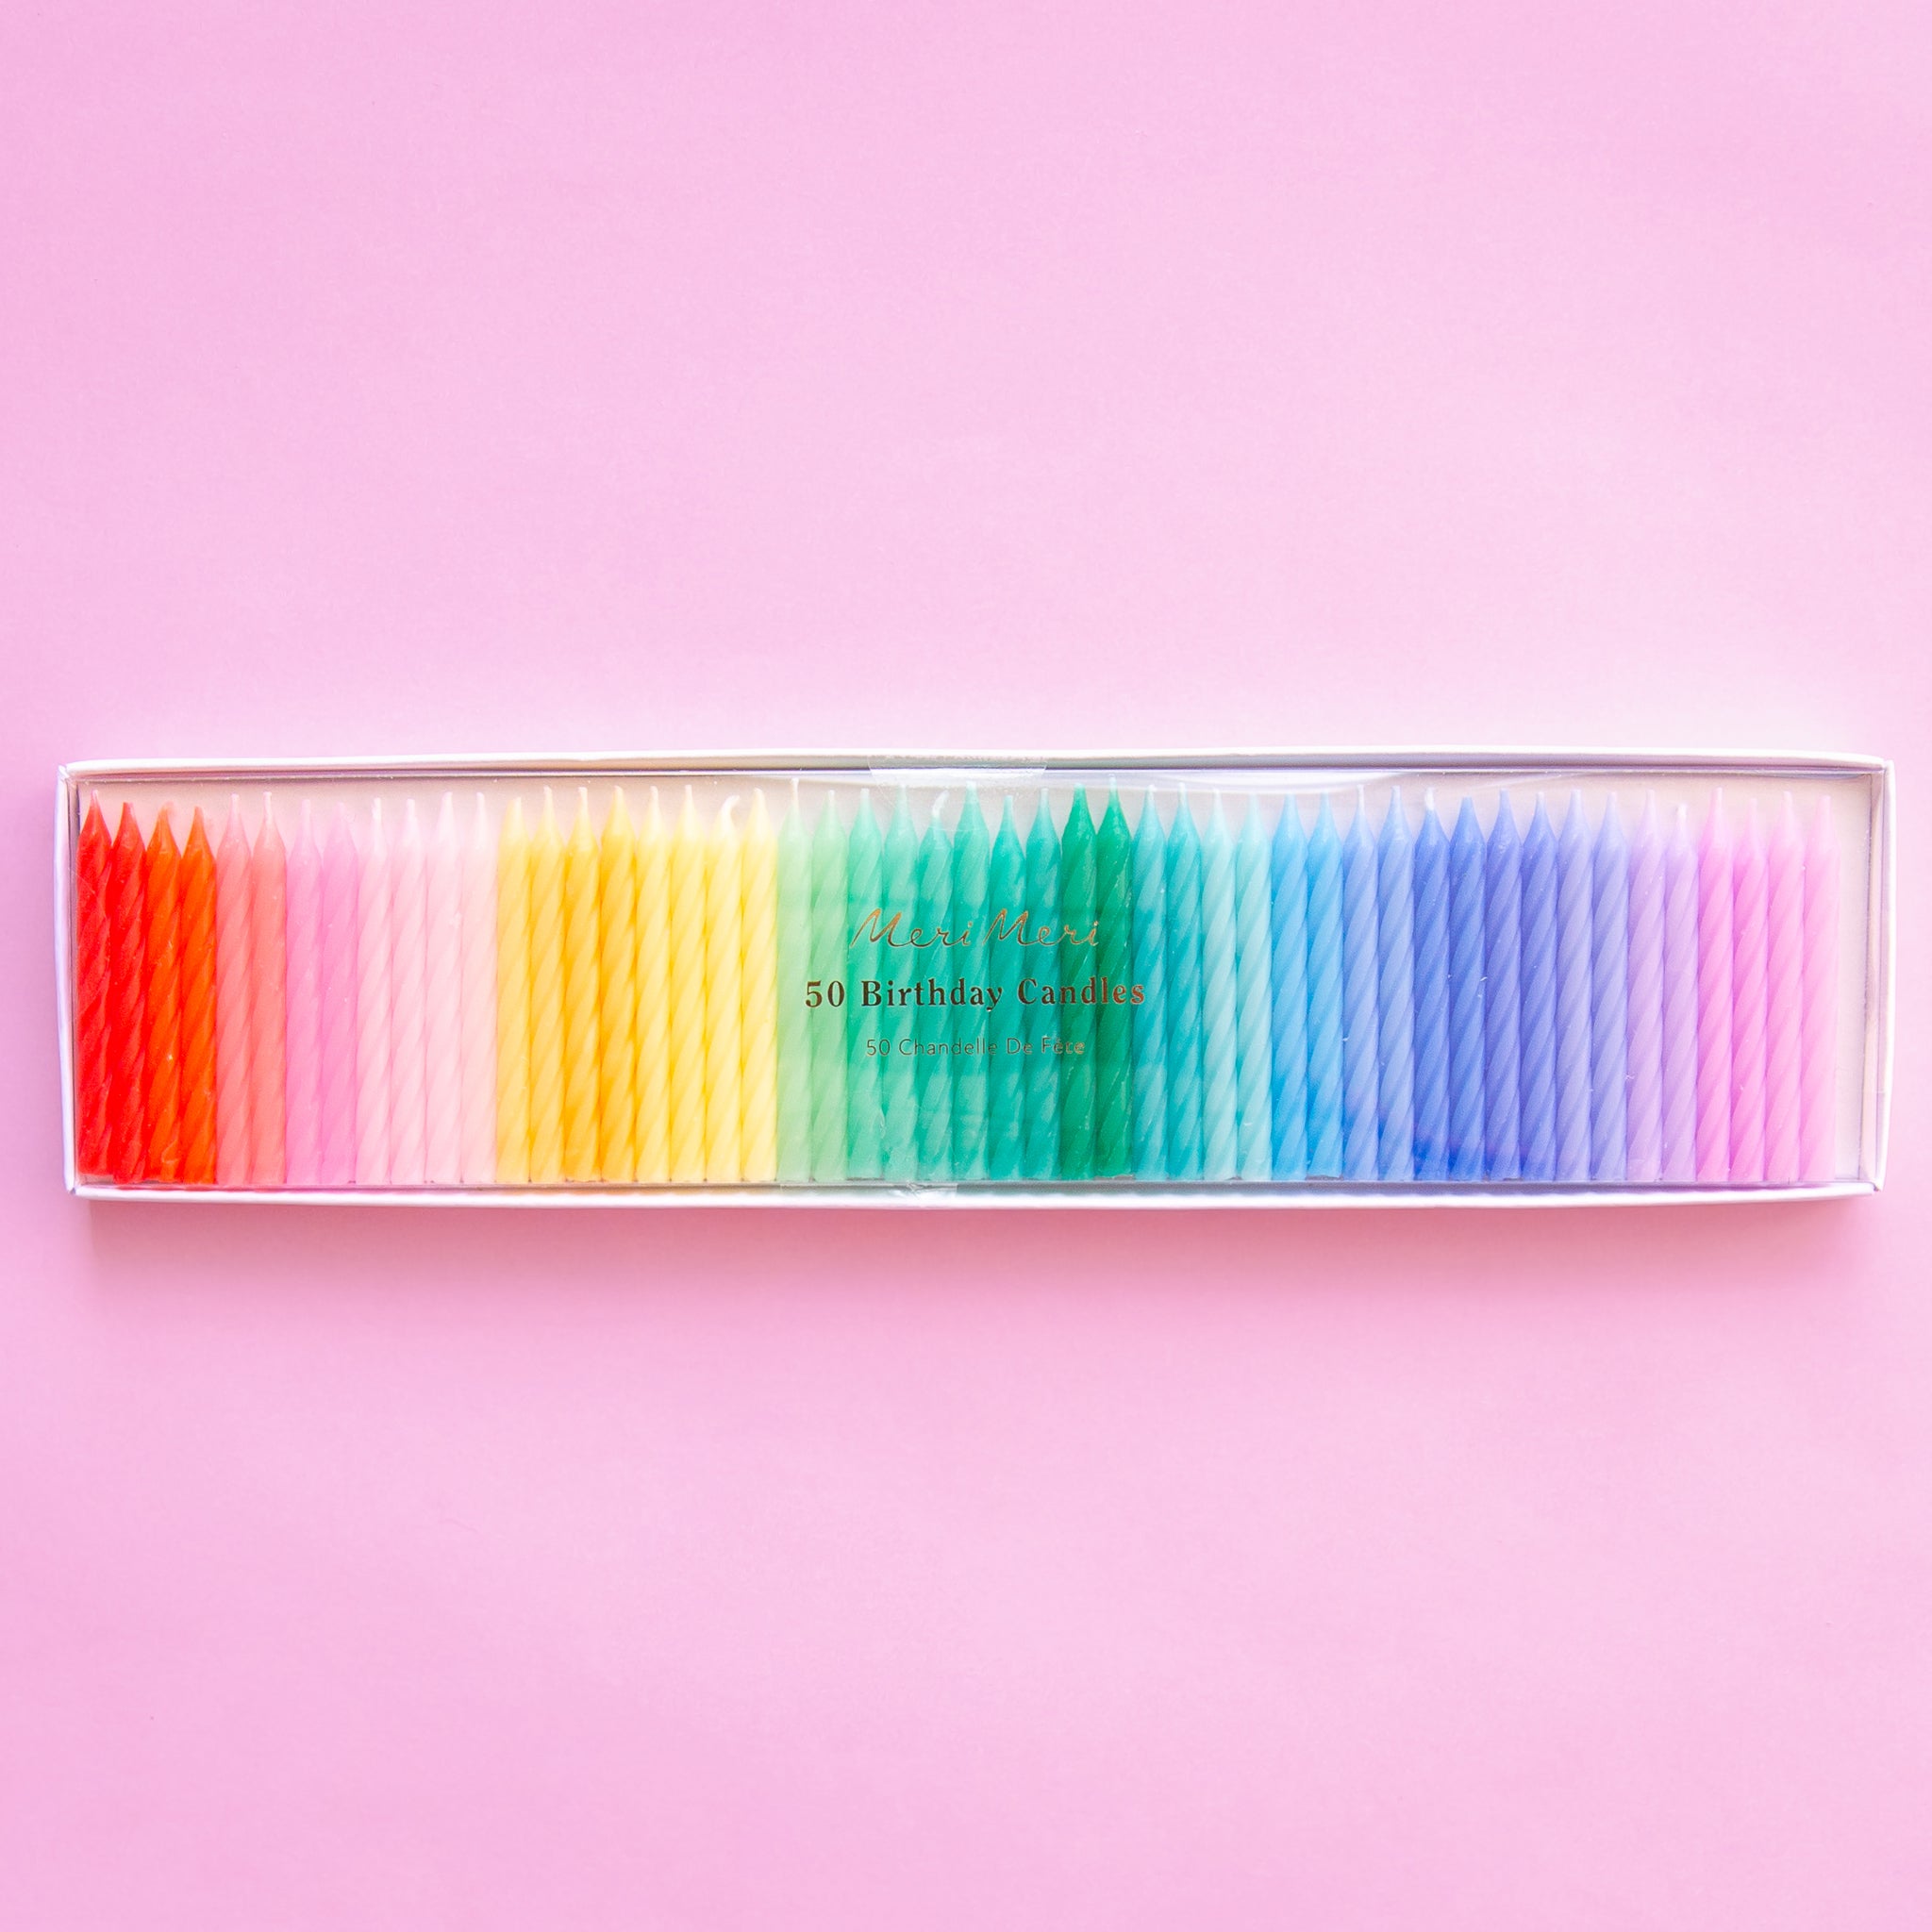 A pack of 50 twisted candles in all the colors of the rainbow